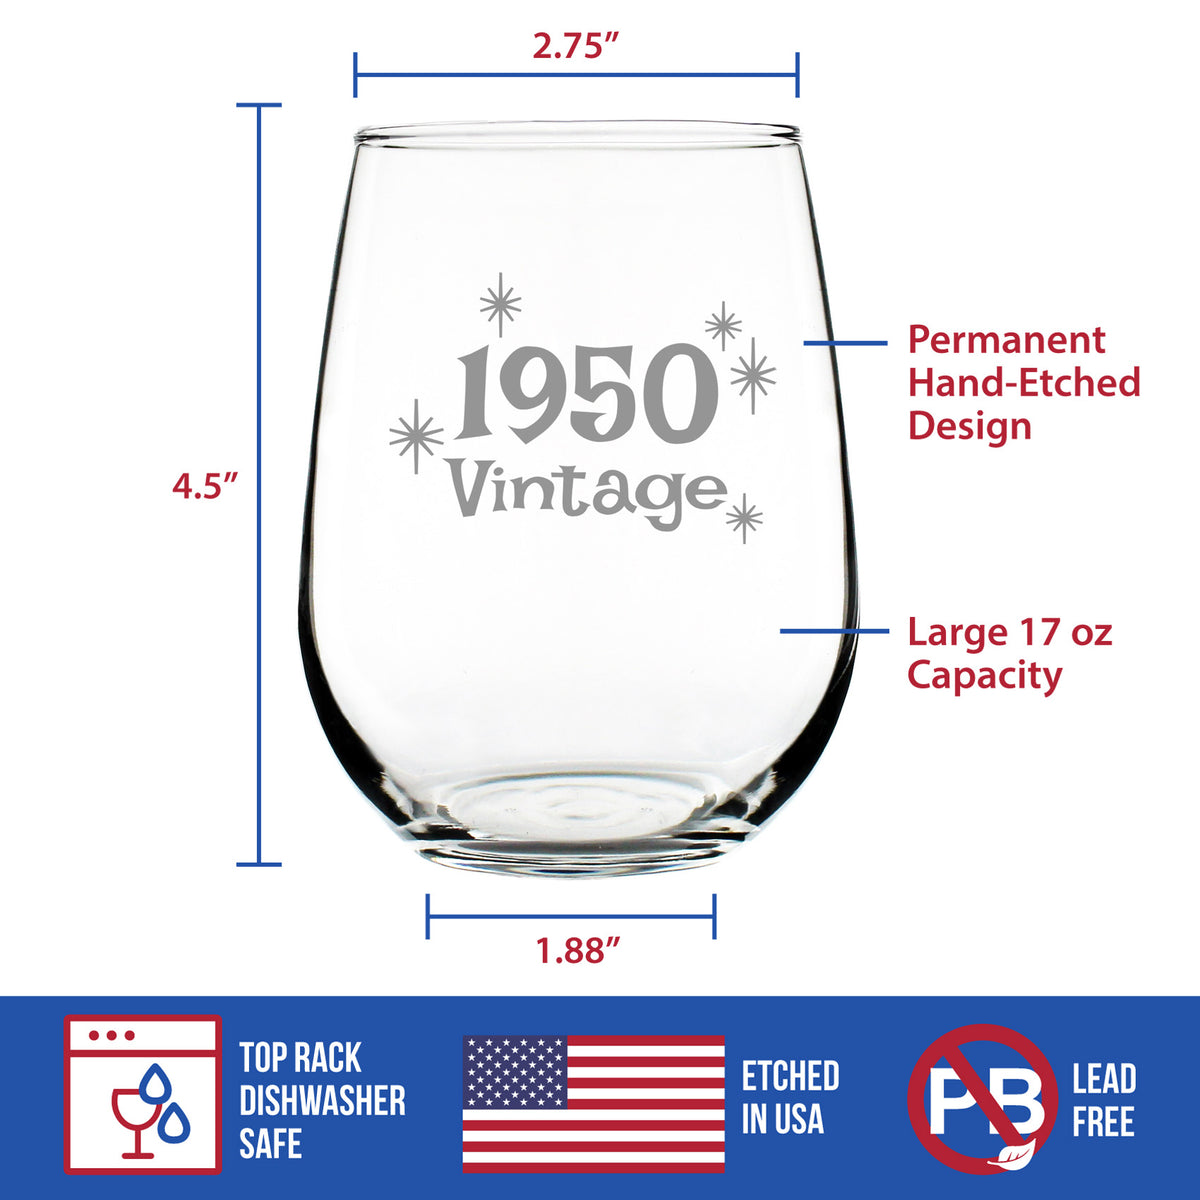 Vintage 1950 - 74th Birthday Stemless Wine Glass Gifts for Women &amp; Men Turning 74 - Bday Party Decor - Large Glasses